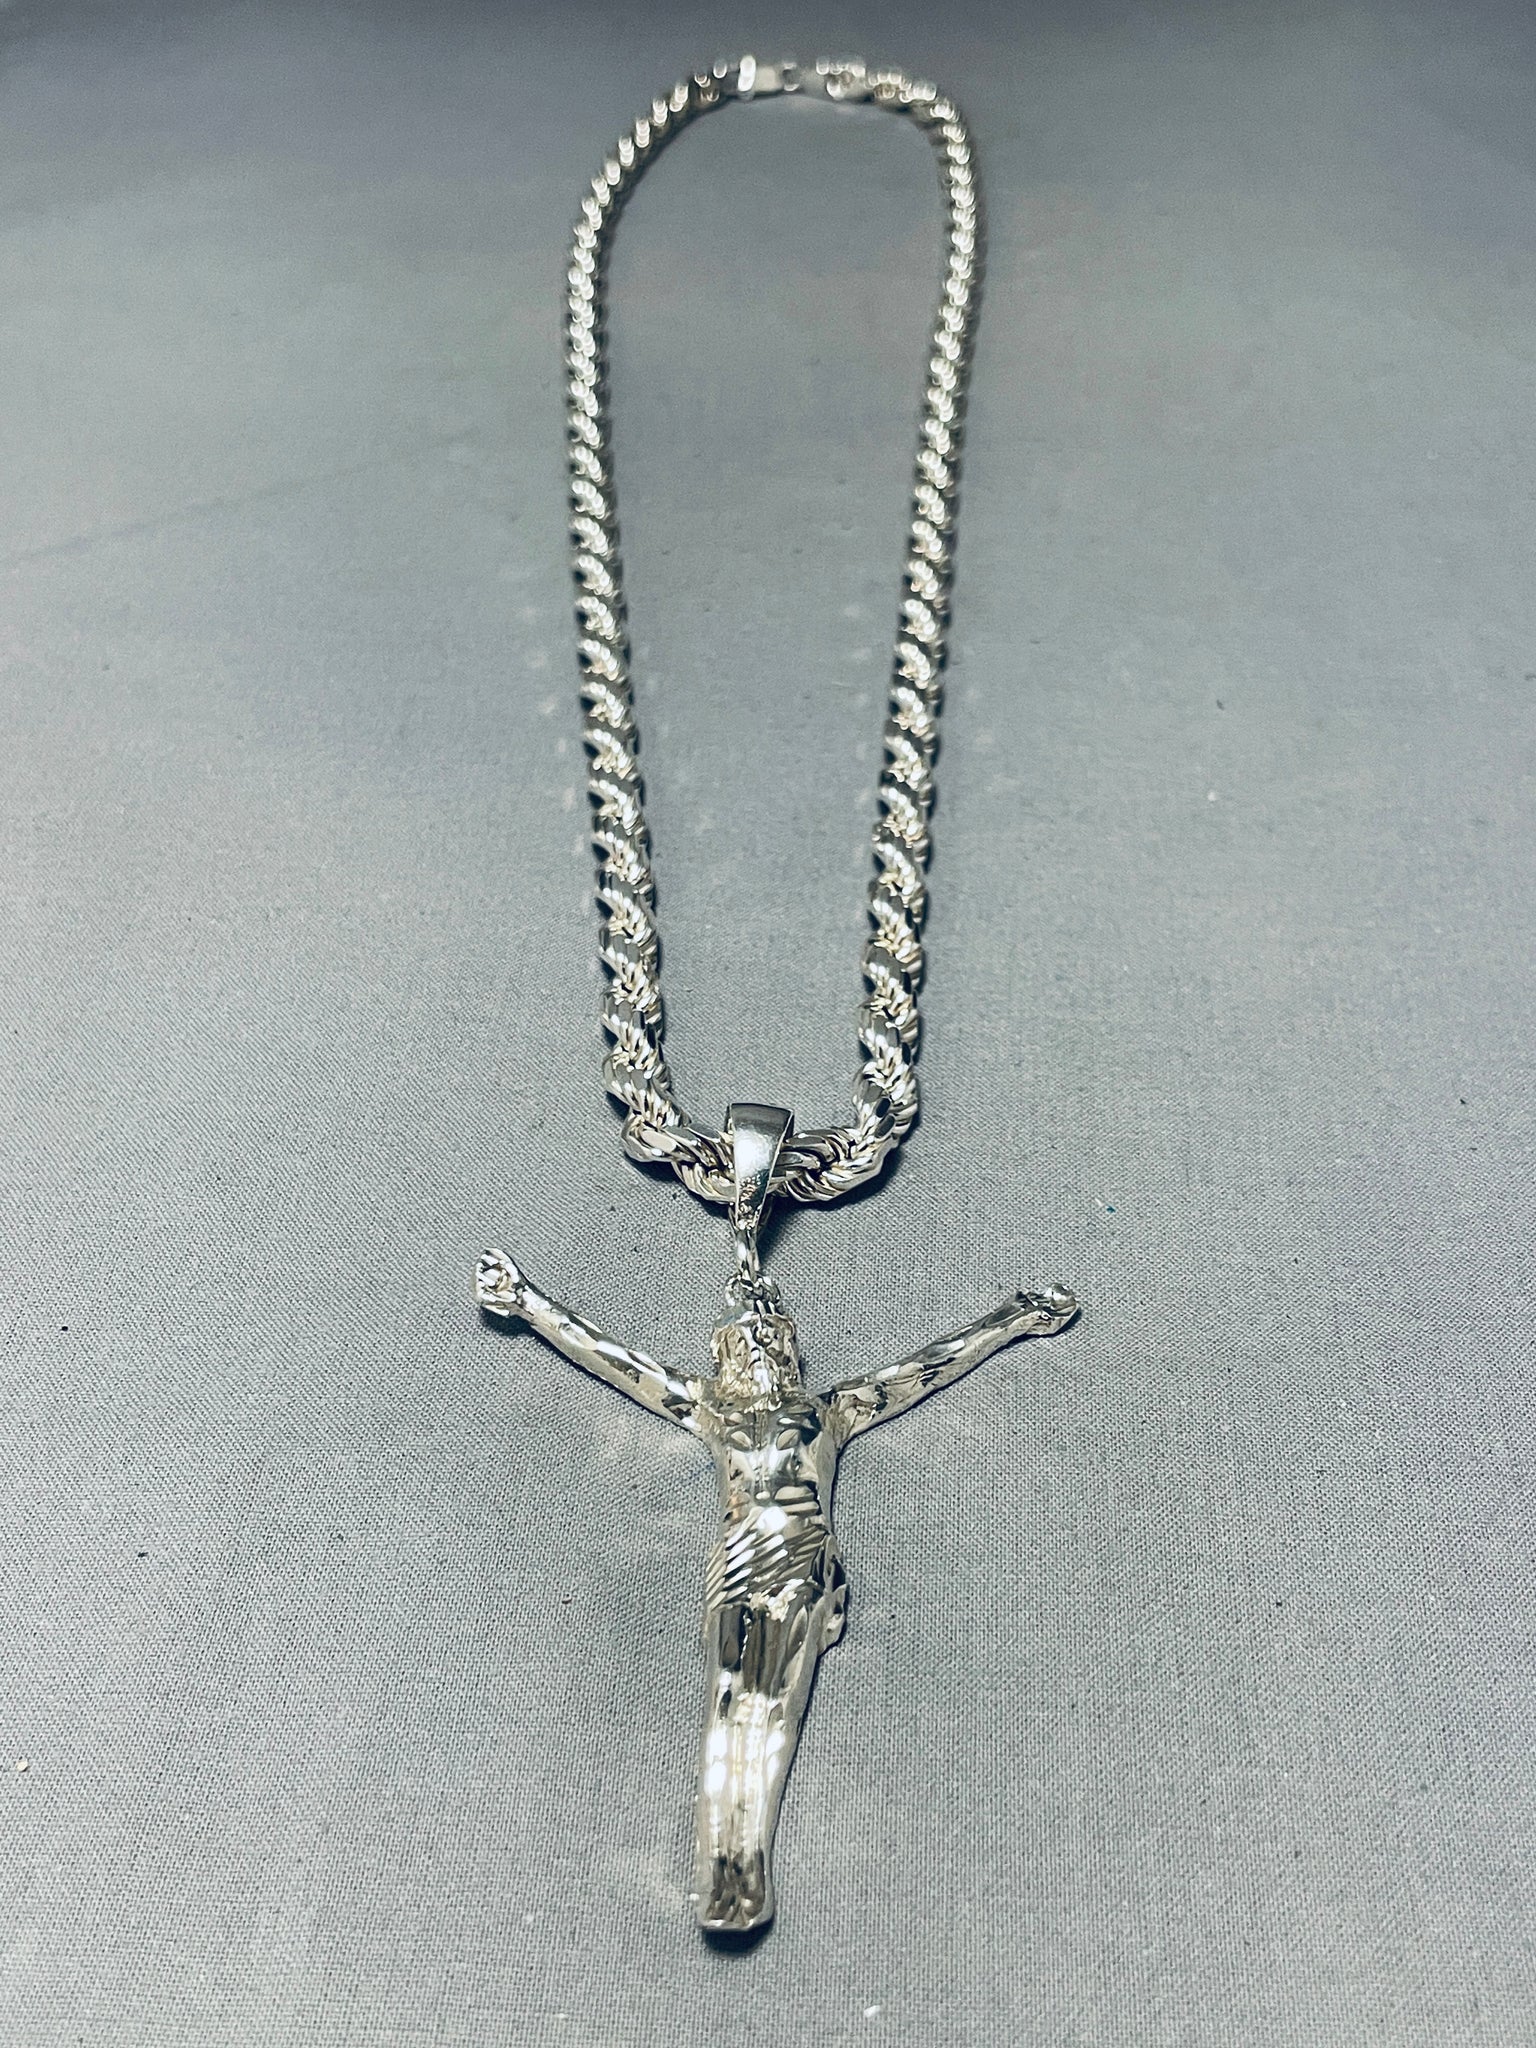 Men's Sterling Silver Crucifix Pendant Necklace with Stainless Steel Chain,  24 | eBay